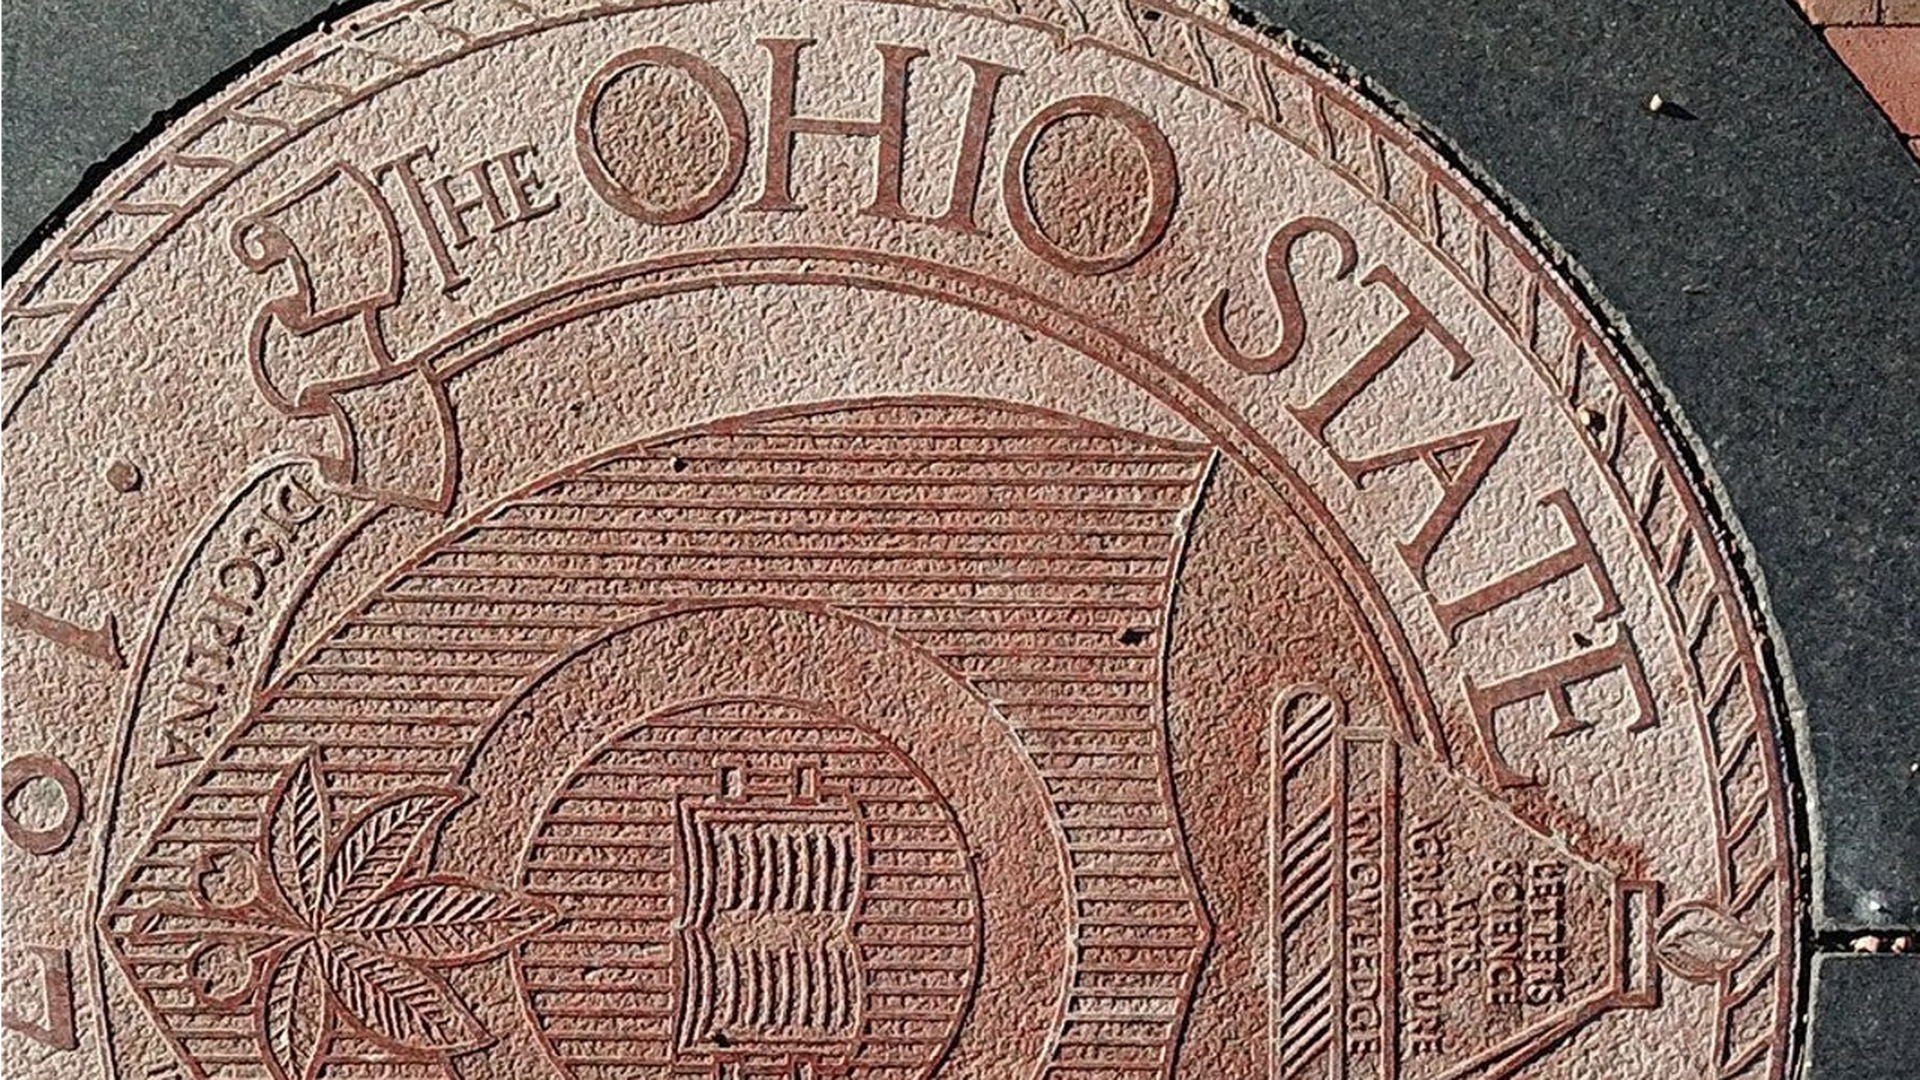 A close up of the Ohio State University seal